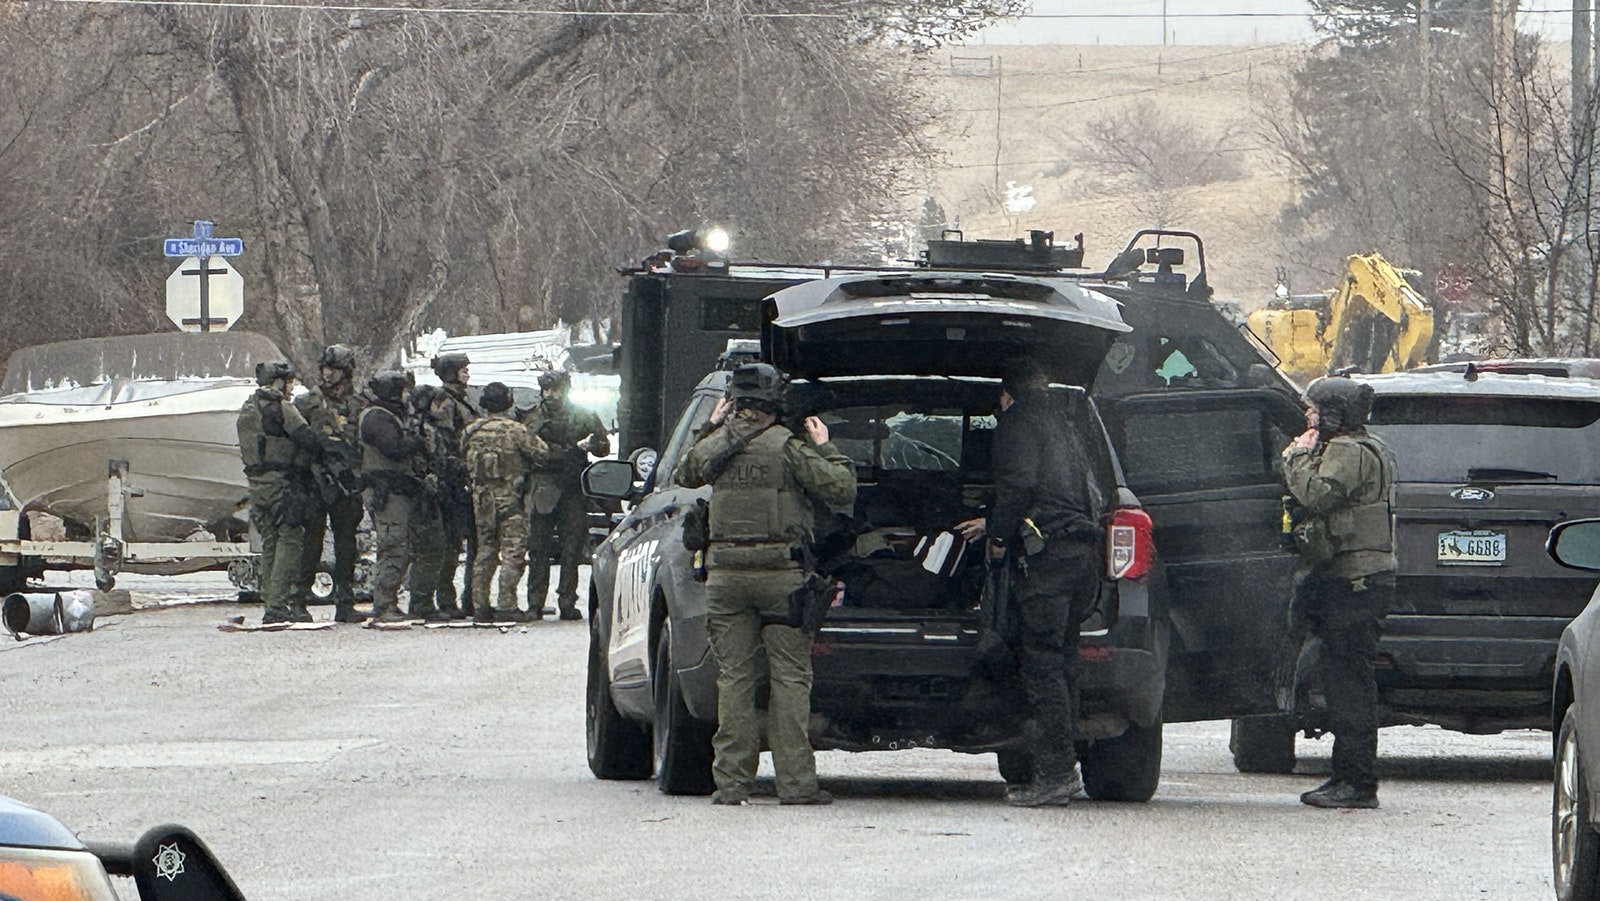 Scenes Wednesday morning from a standoff in Sheridan between law enforcement and a man suspected of shooting and killing a police officer.